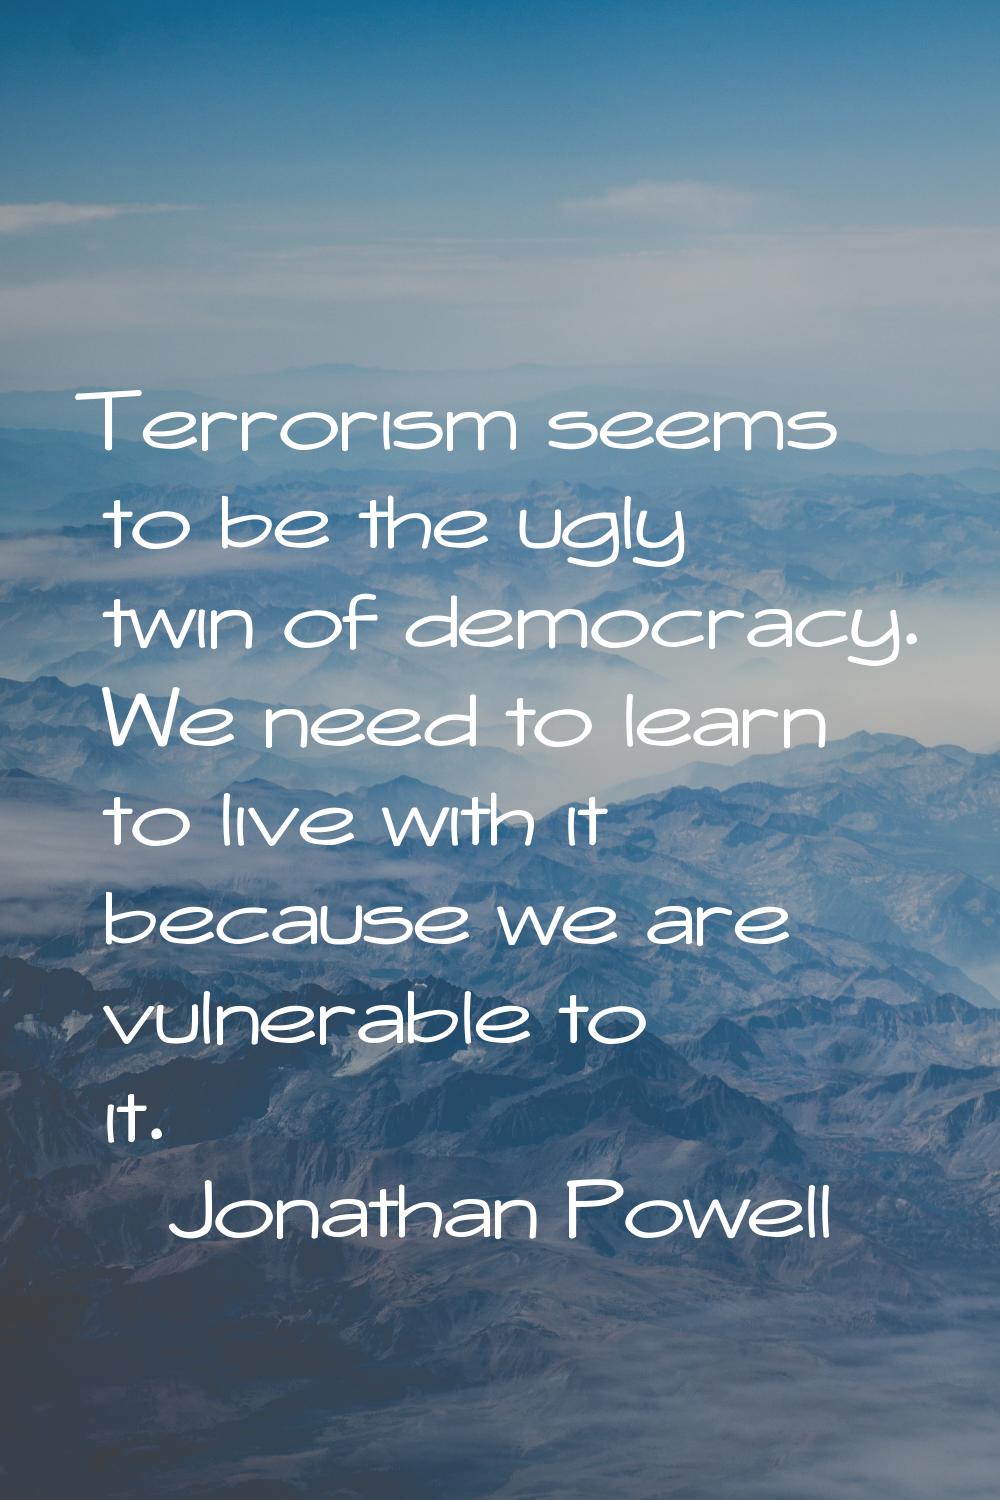 Terrorism seems to be the ugly twin of democracy. We need to learn to live with it because we are v